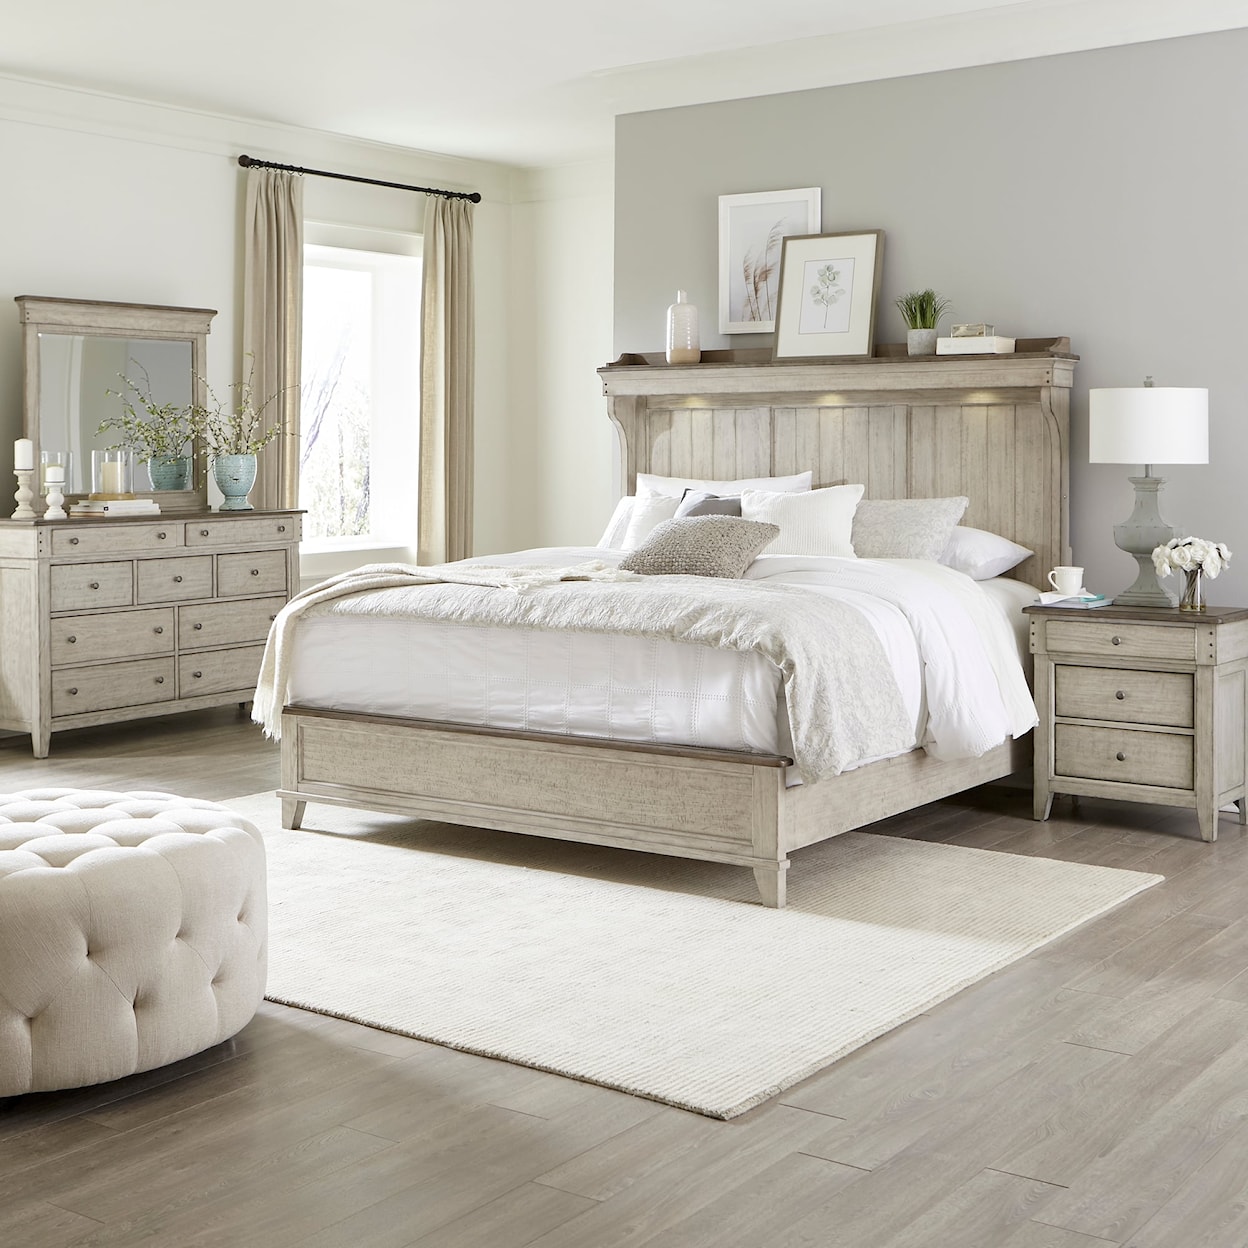 Libby Ivy Hollow 4-Piece King Mantle Bedroom Set